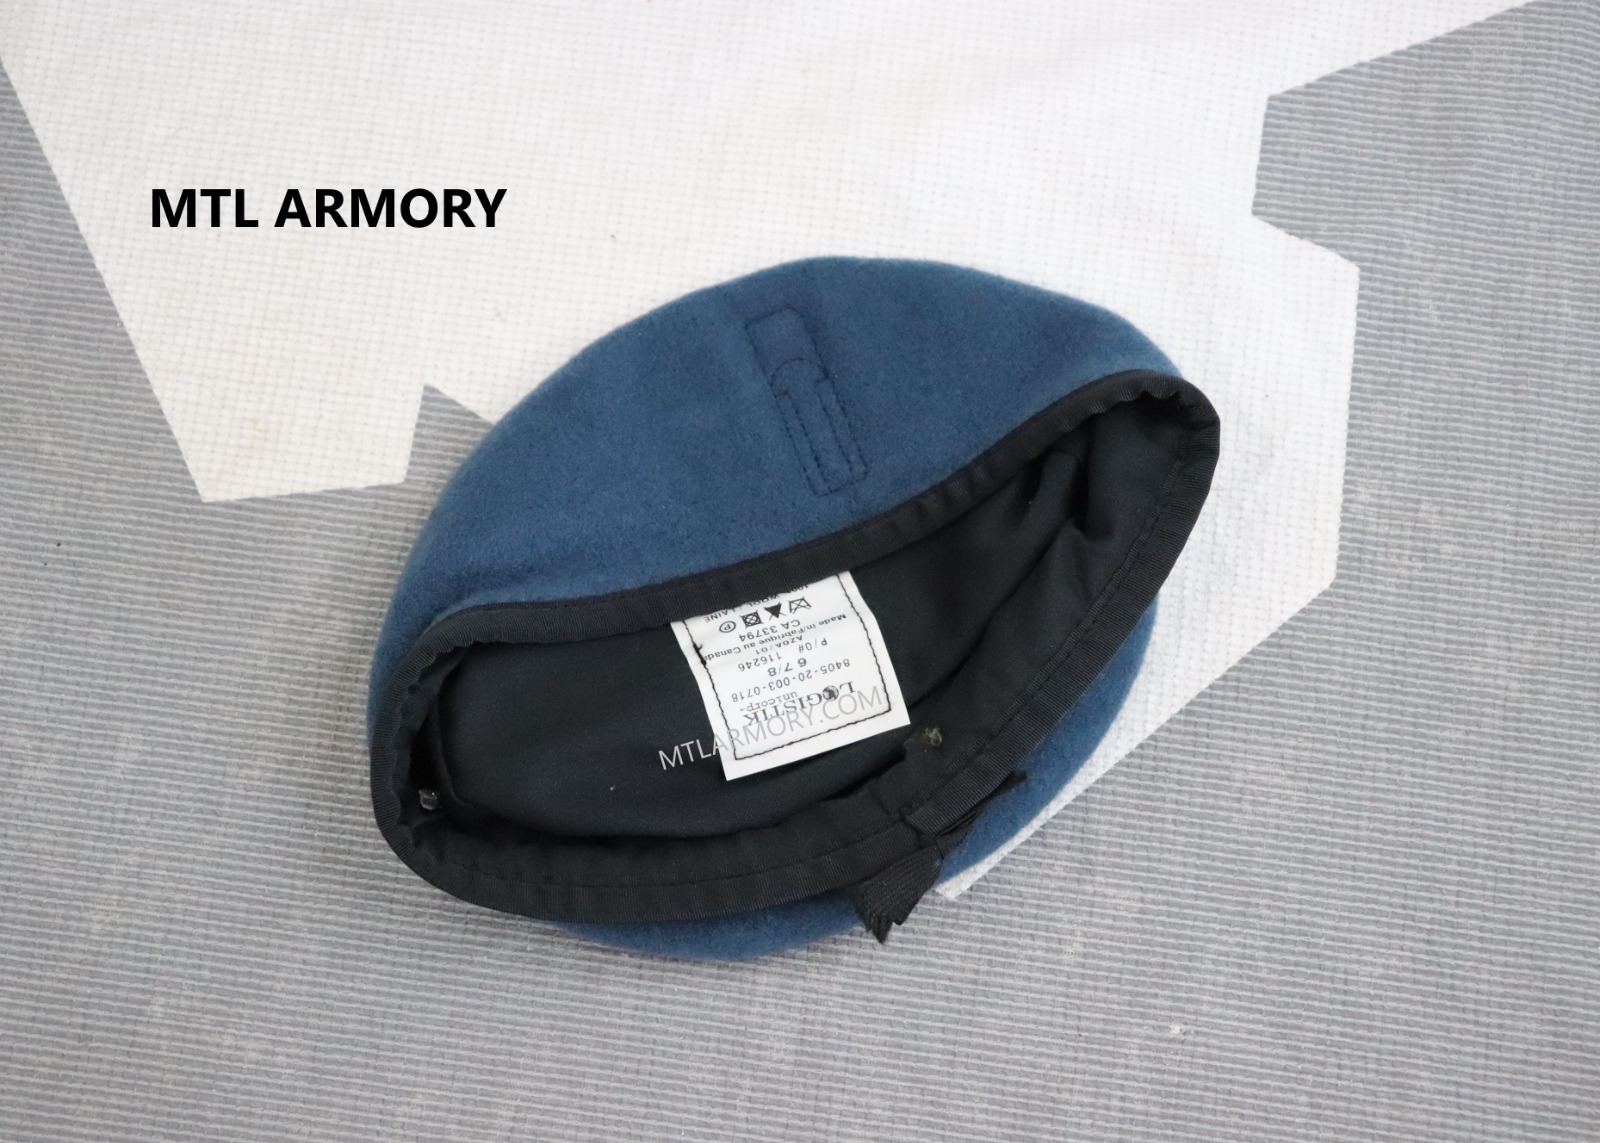 ROYAL CANADIAN AIR FORCE BLUE BERET SIZE 6  7/8 RCAF   (MTL ARMORY )